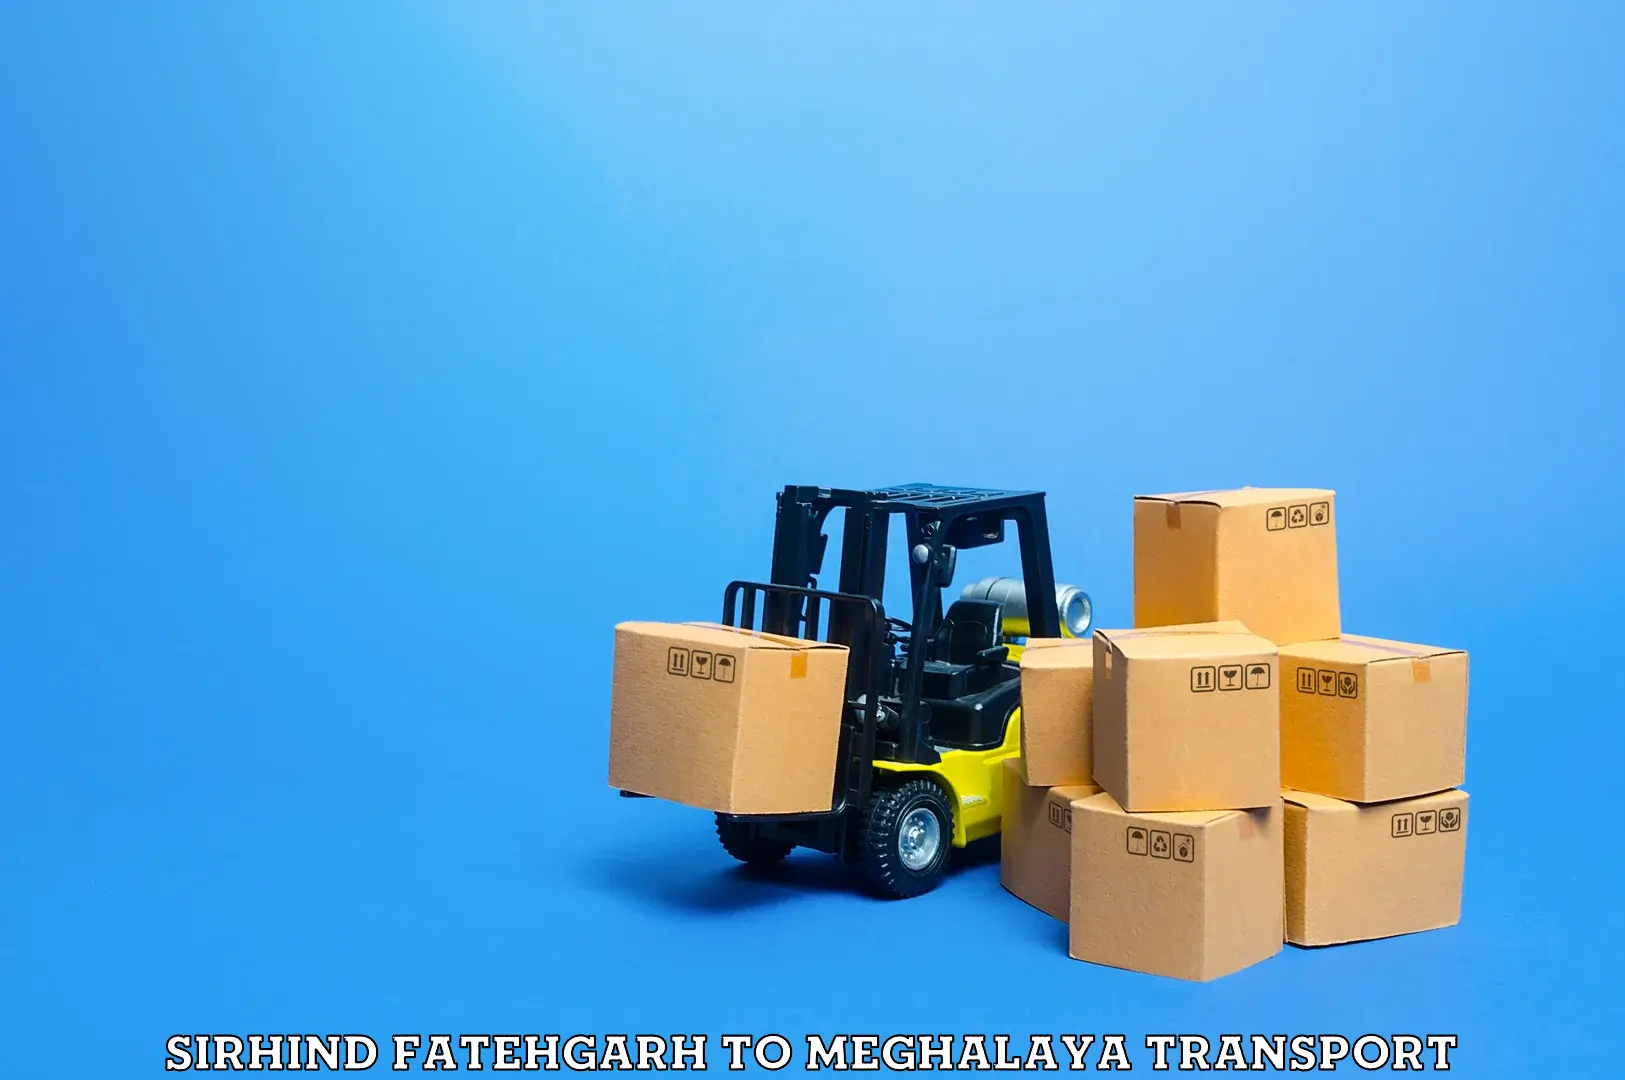 Daily parcel service transport in Sirhind Fatehgarh to Tura